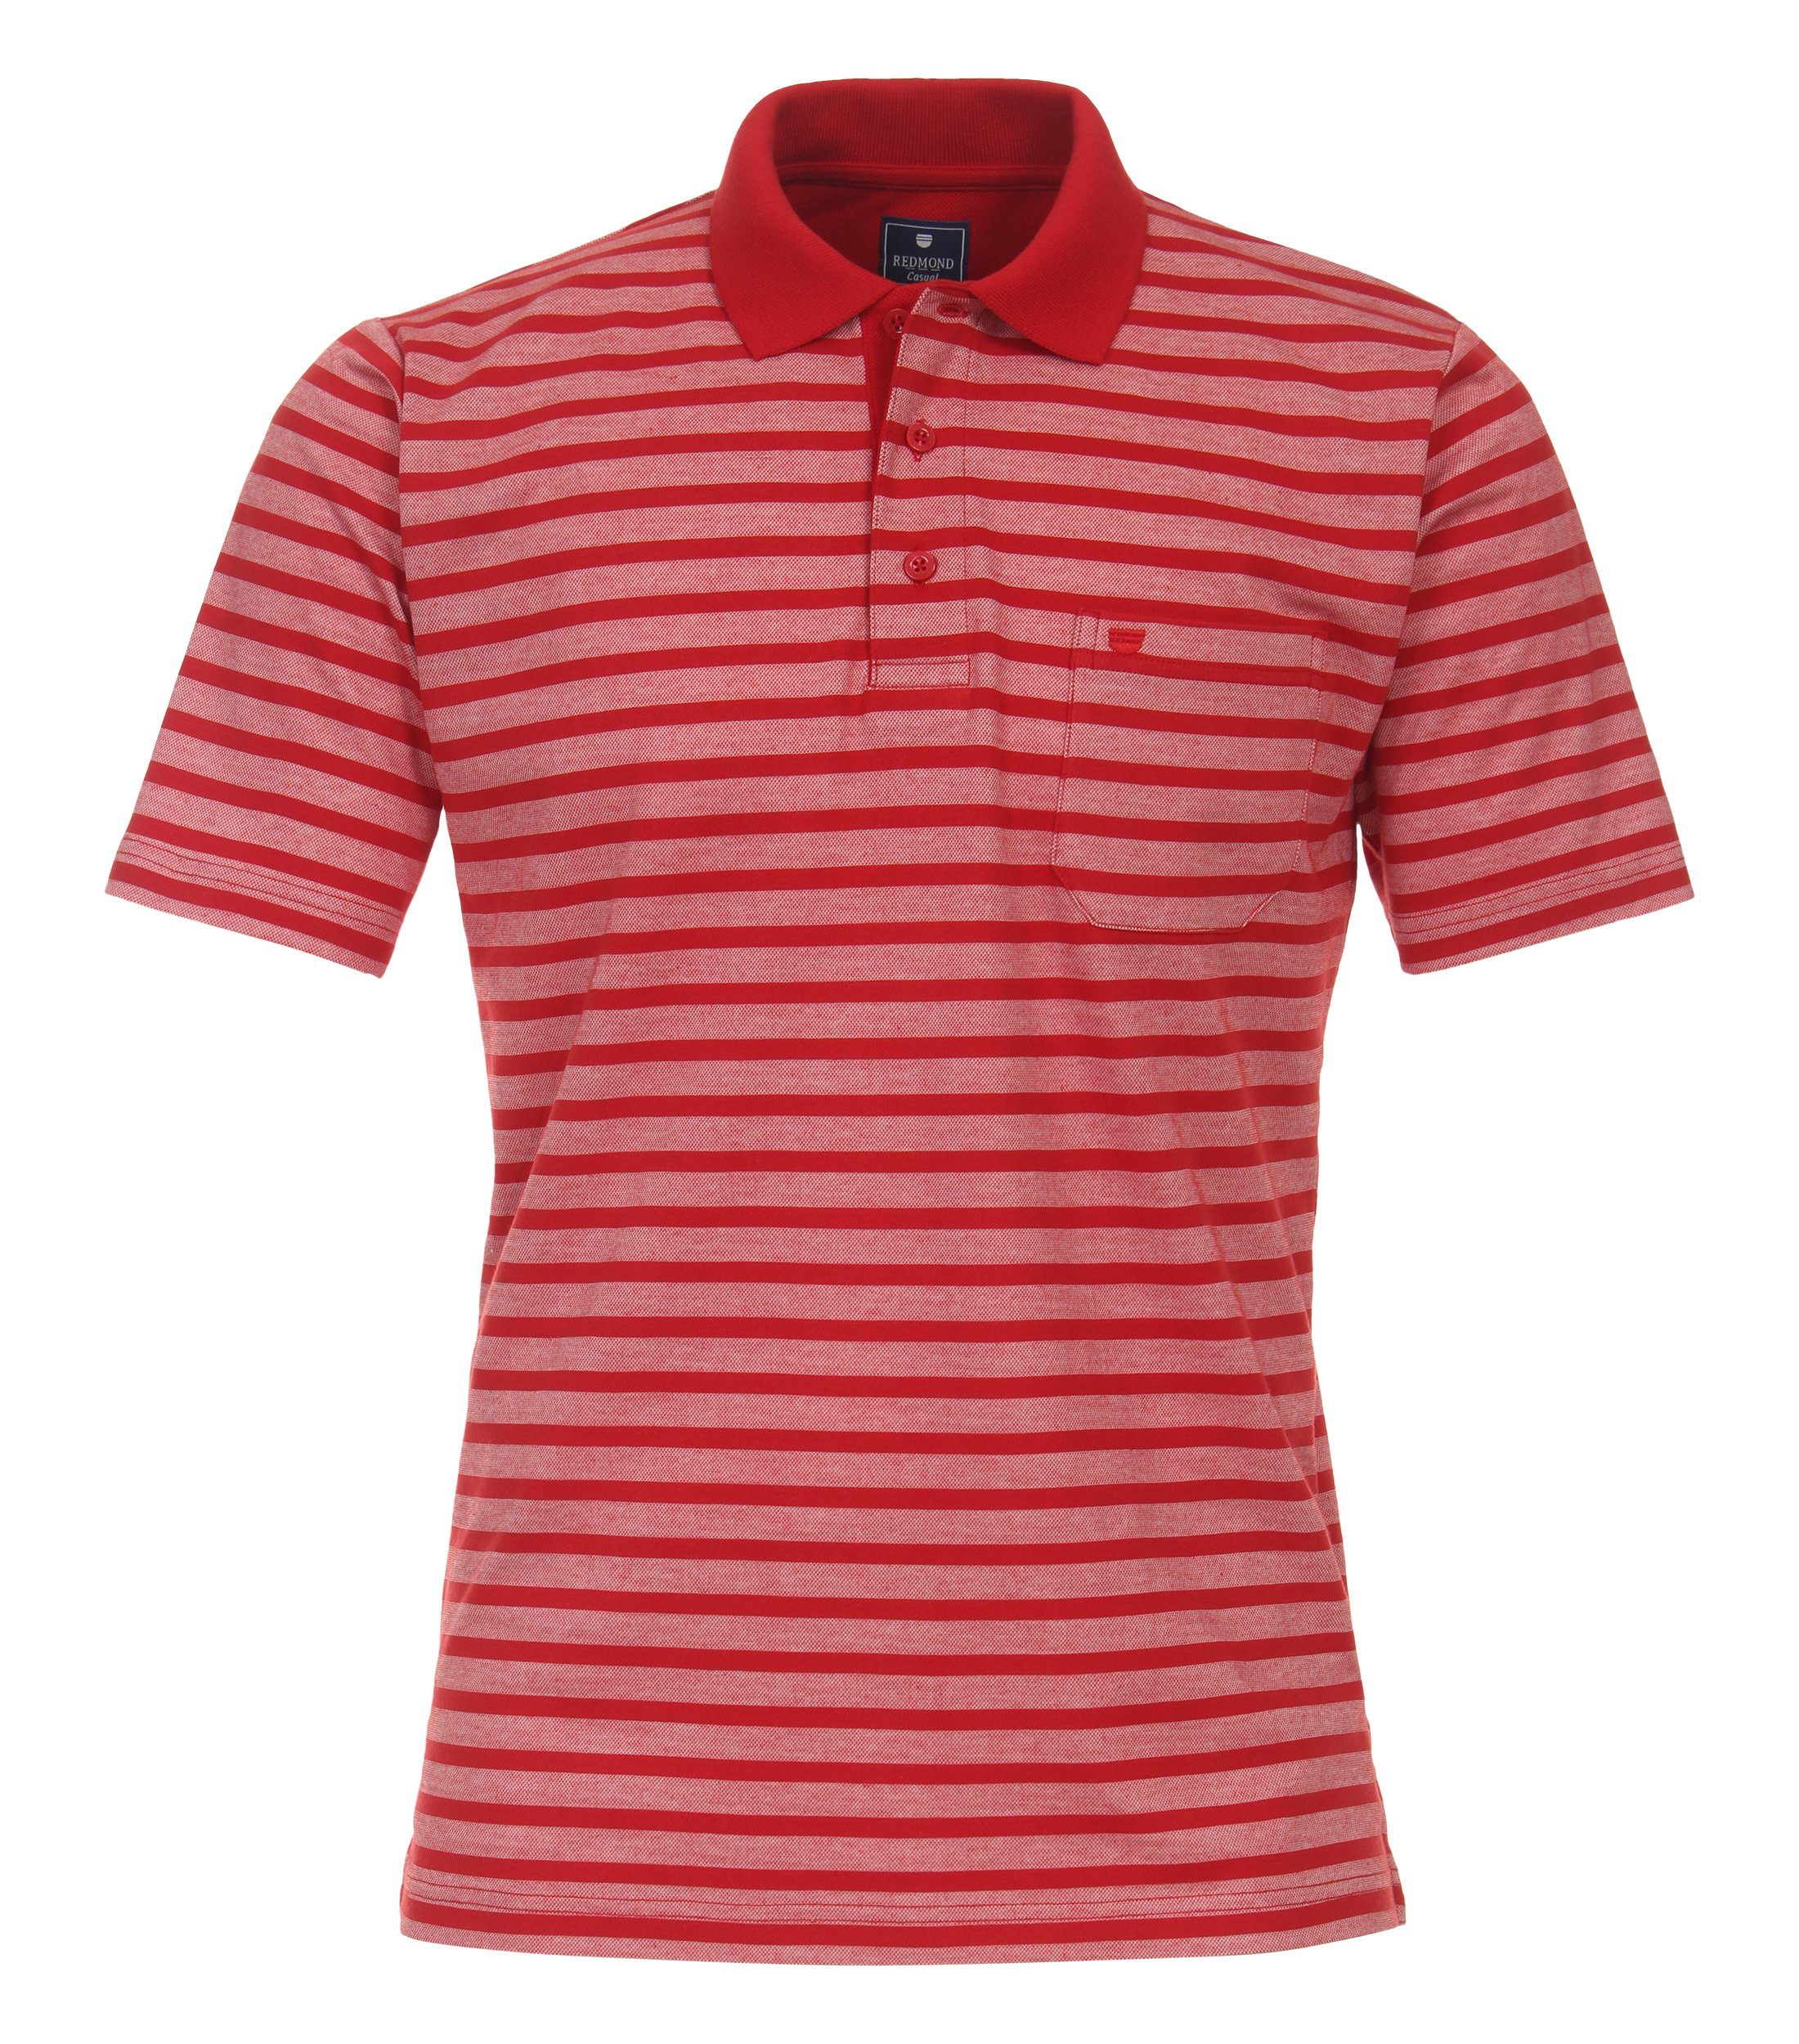 Redmond Poloshirt andere 50 Muster rot